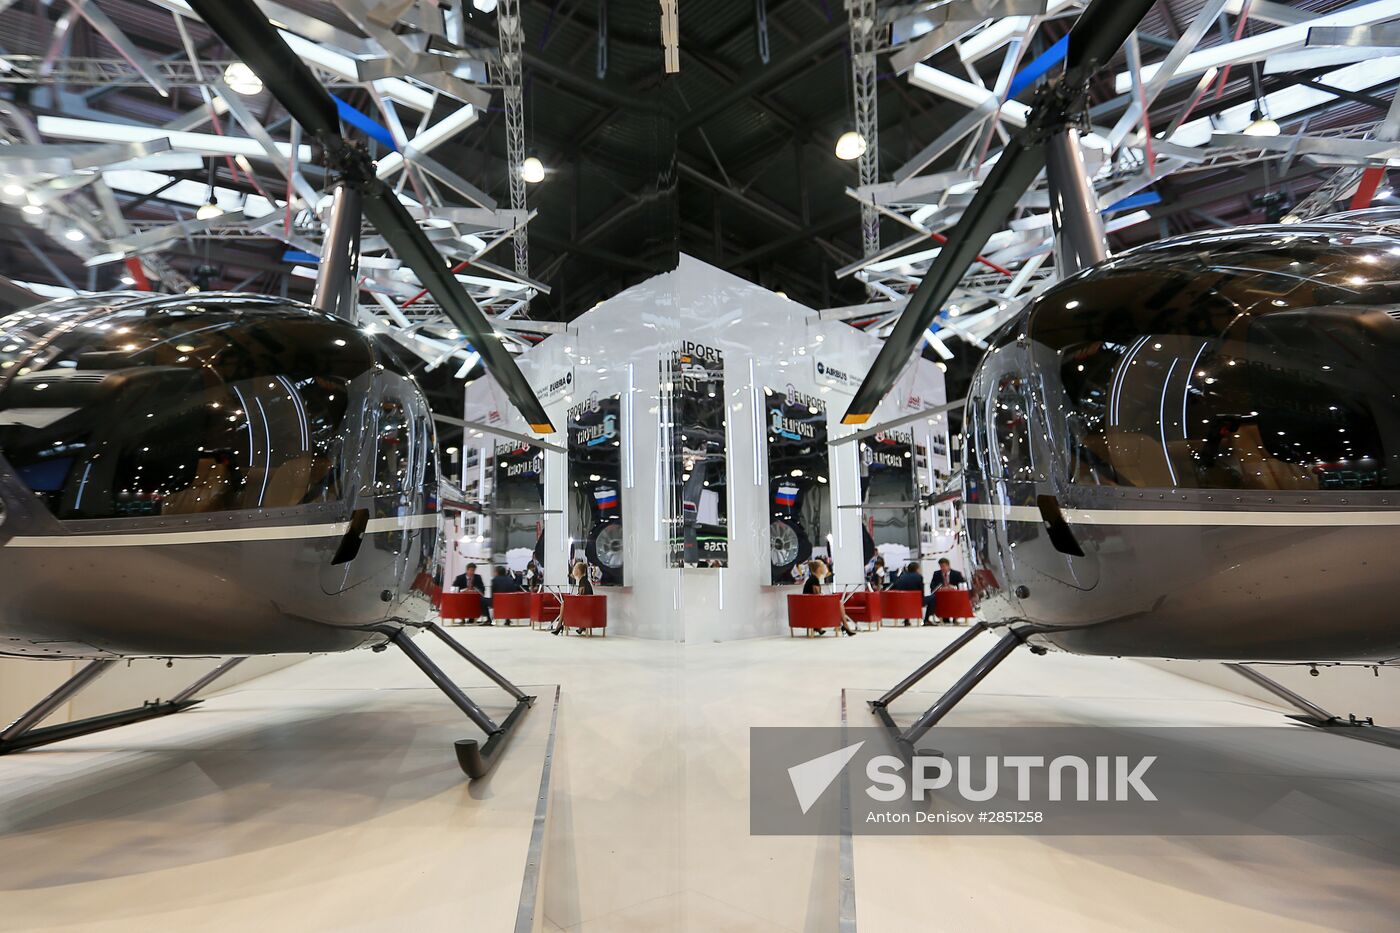 9th International HeliRussia helicopter industry exhibition 2016